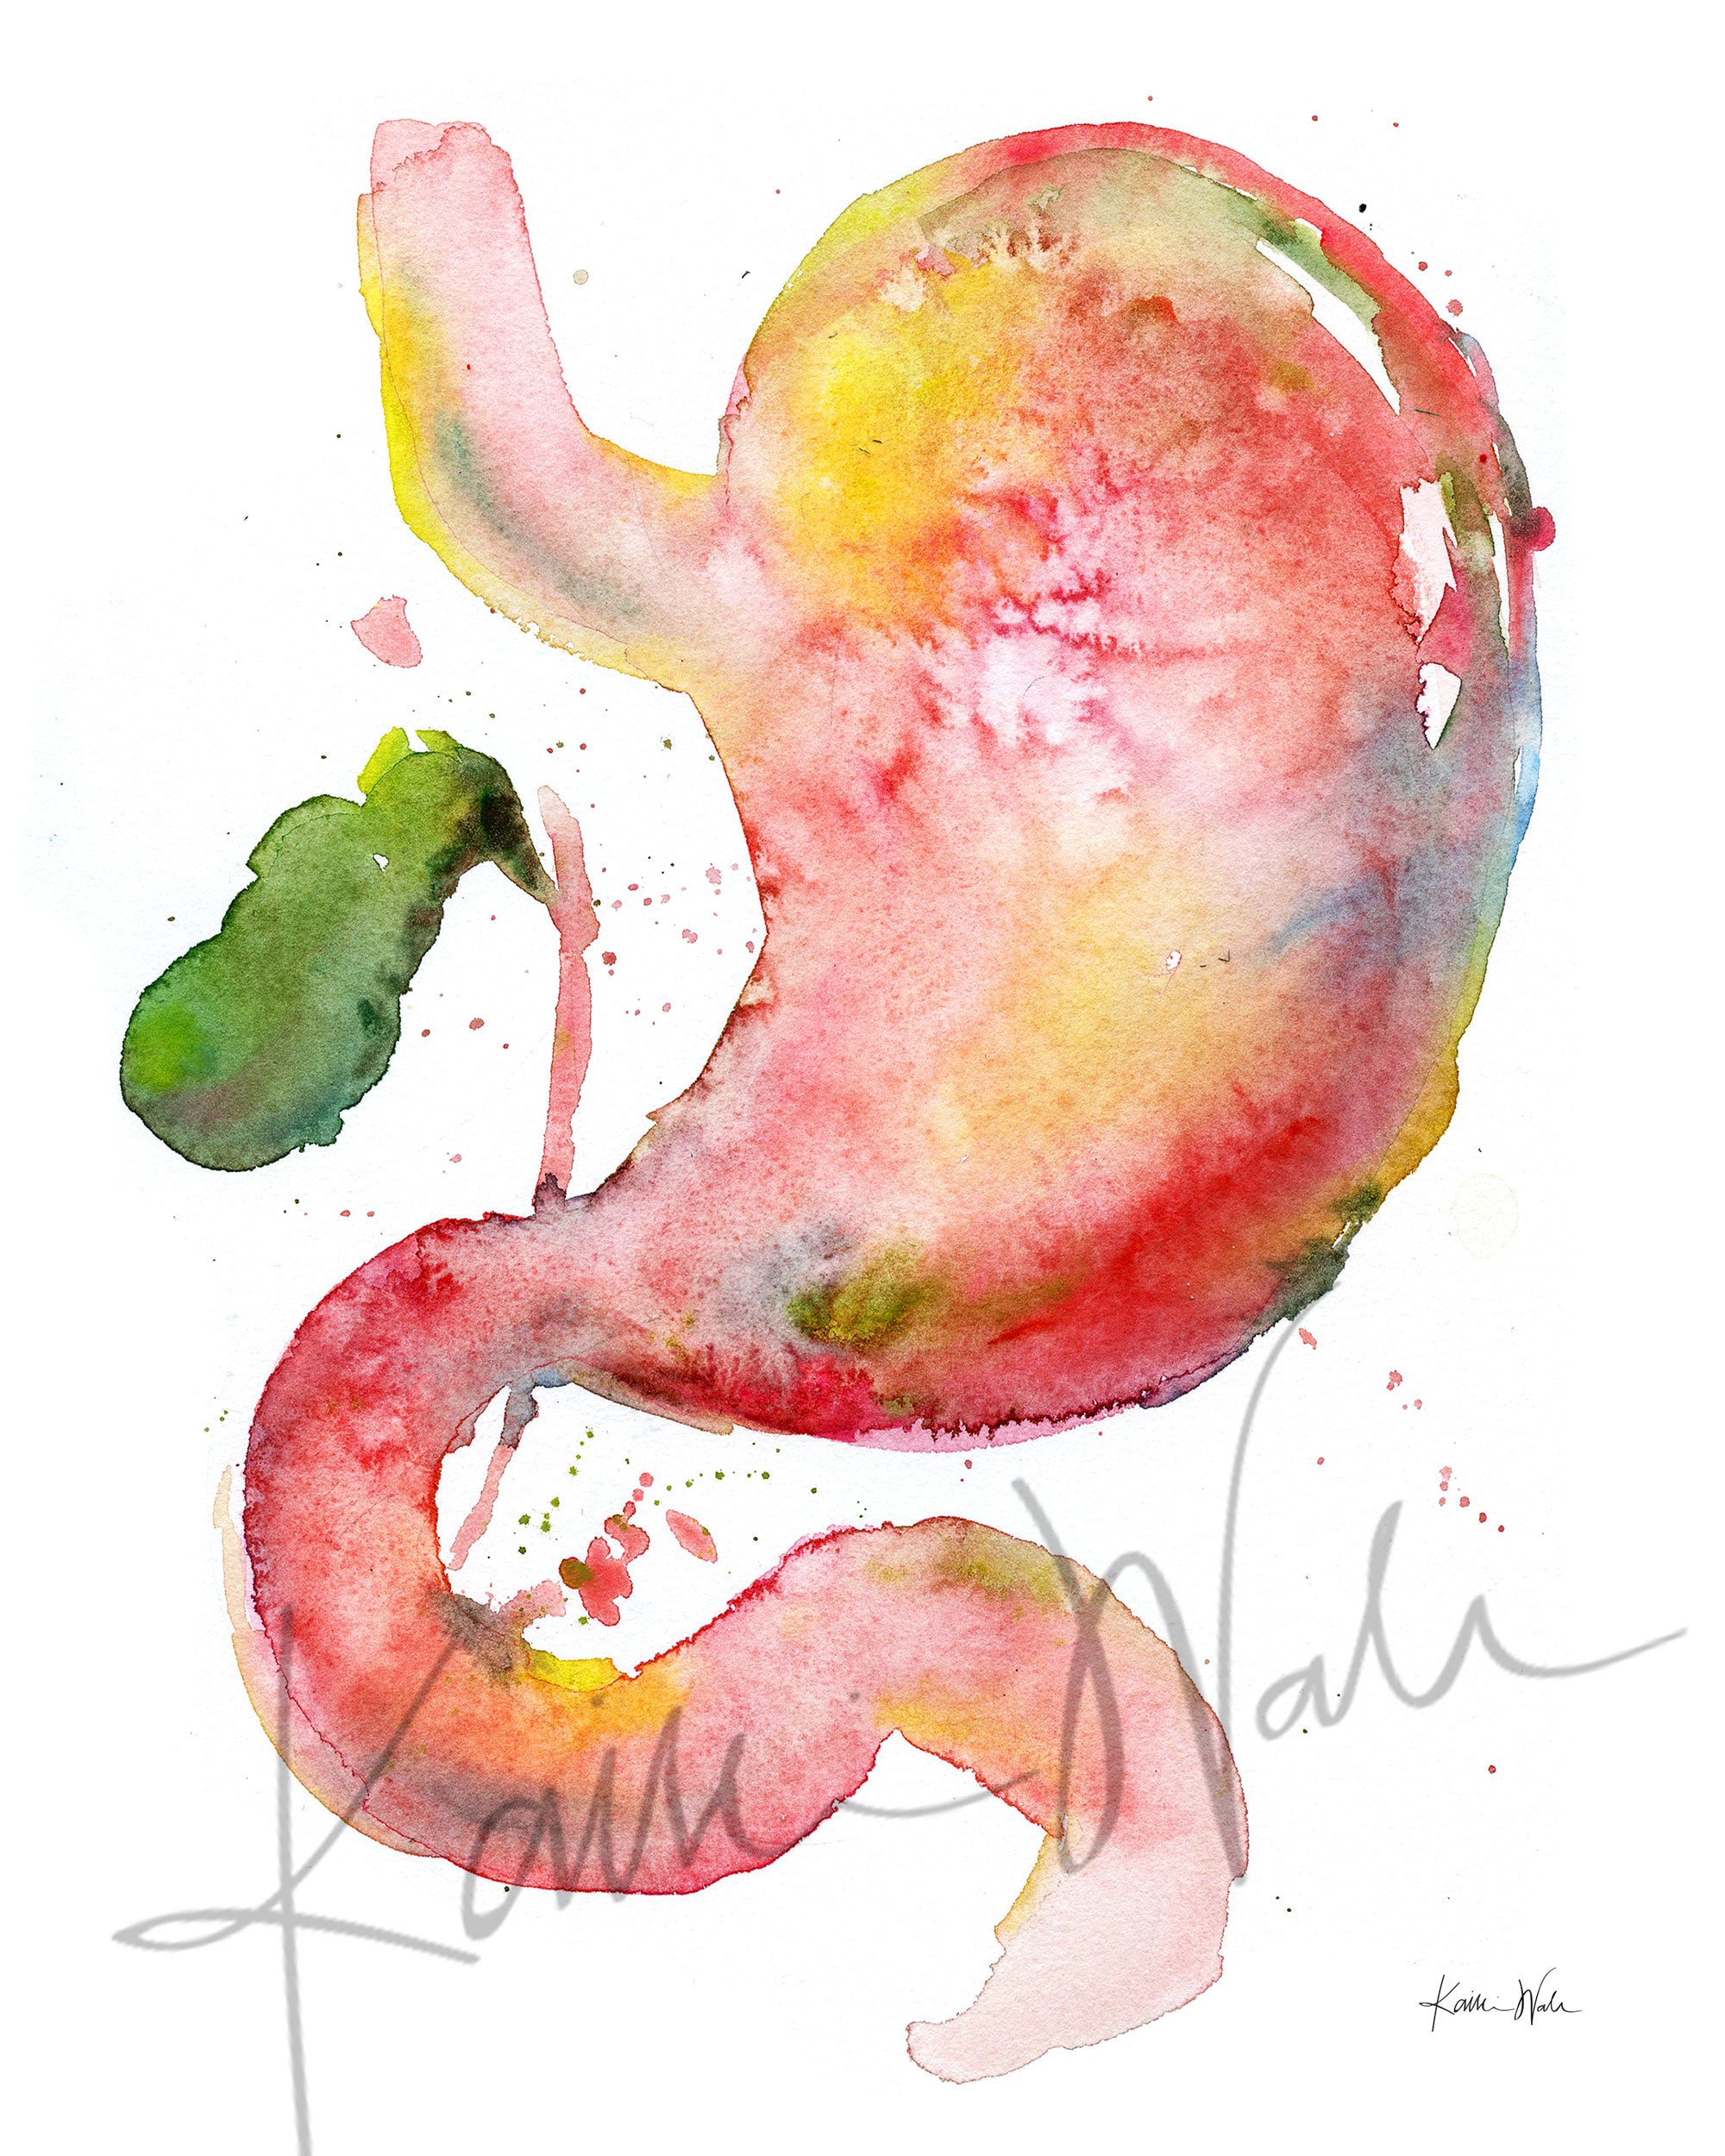 Unframed watercolor painting of a stomach, duodenum, and gallbladder combination.